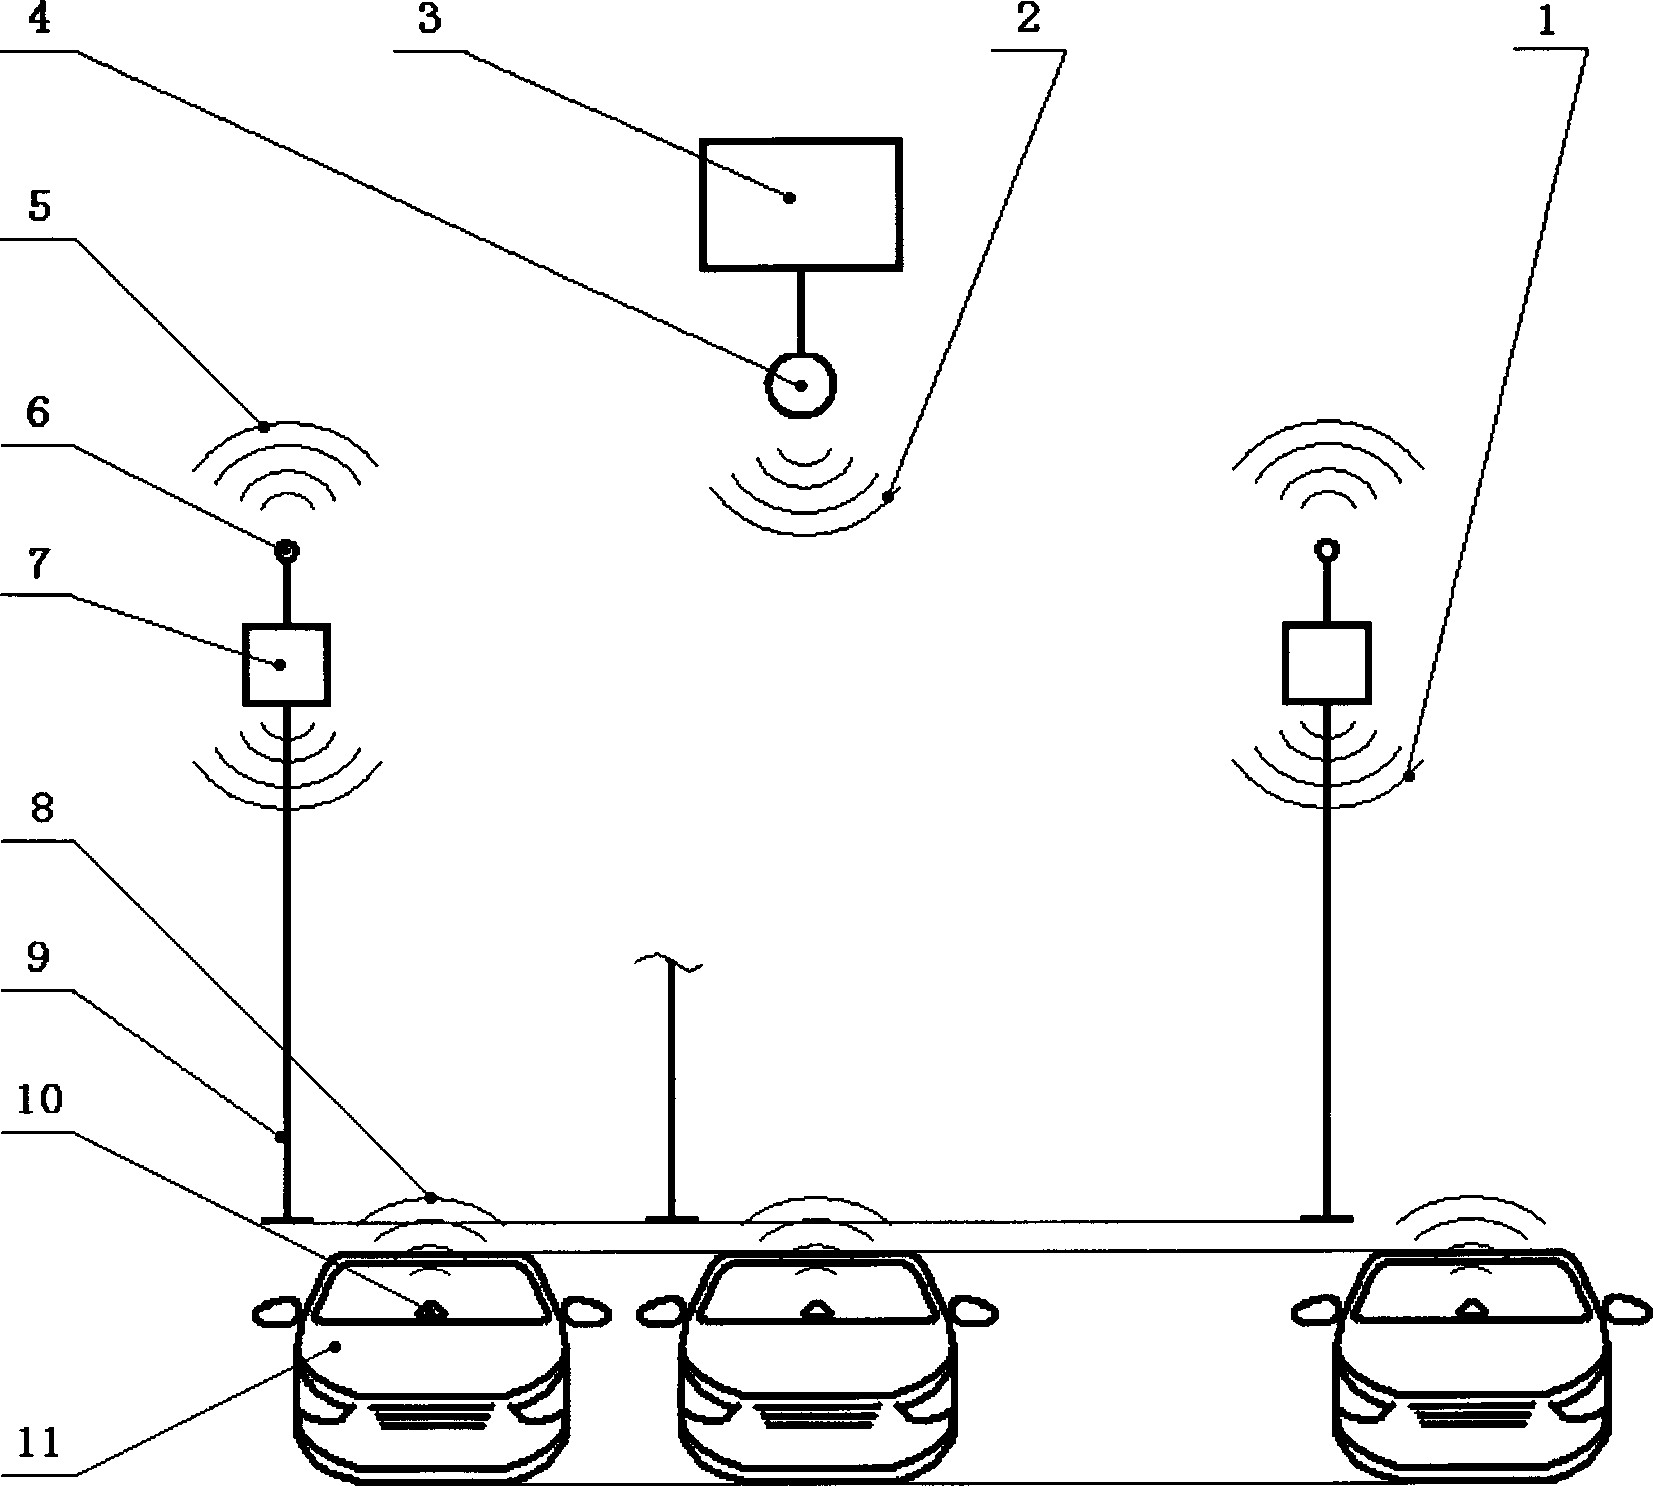 Device for realizing parking positioning monitoring through surface acoustic wave label